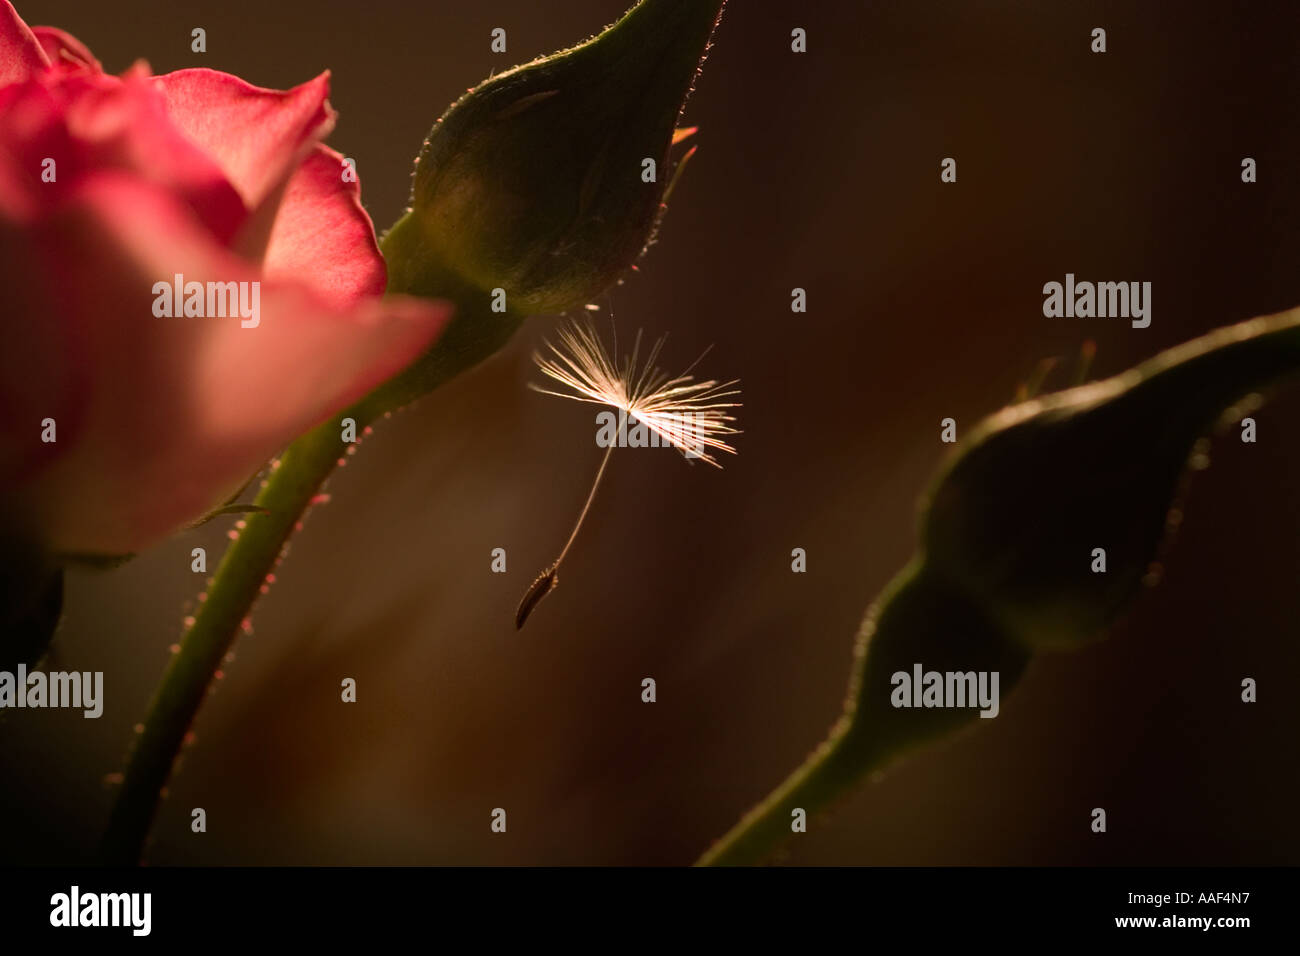 Red rose bud and a flying dandelion seeds Stock Photo